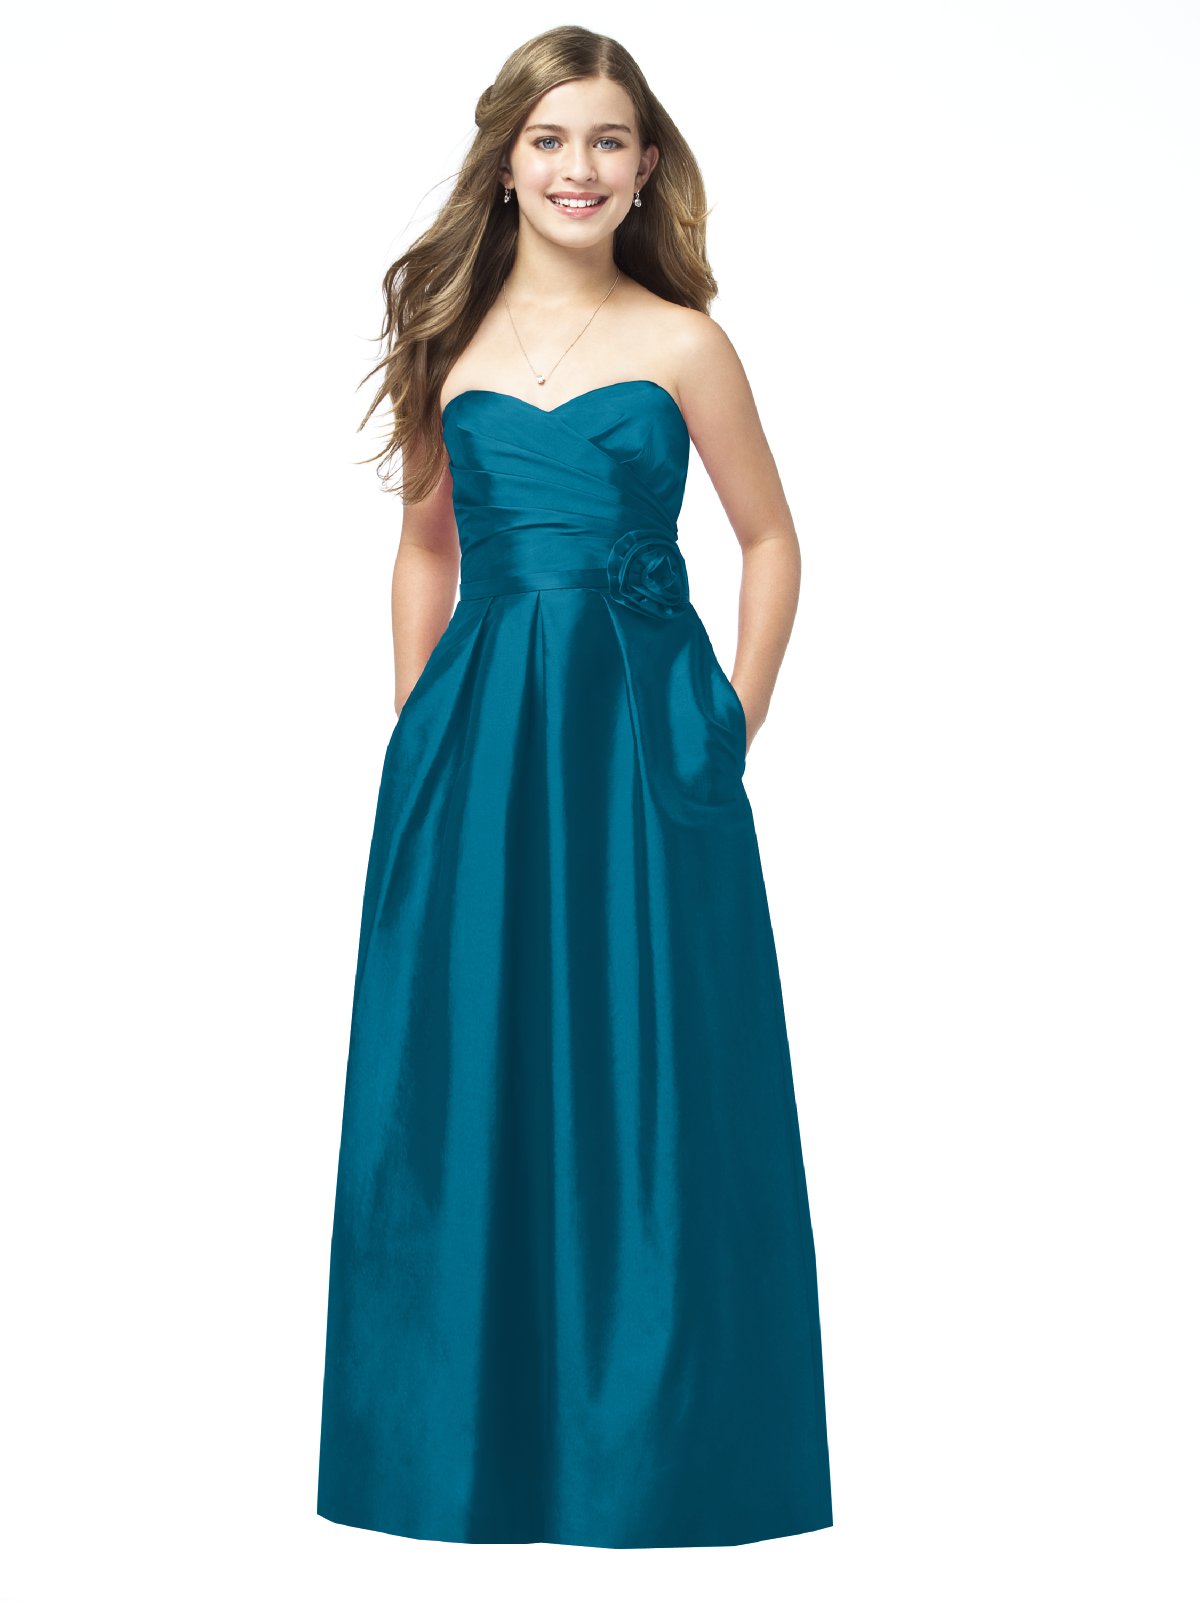 Teal A Line Strapless Sweetheart Zipper Floor Length Satin Prom Dresses With Flowers And Pockets 